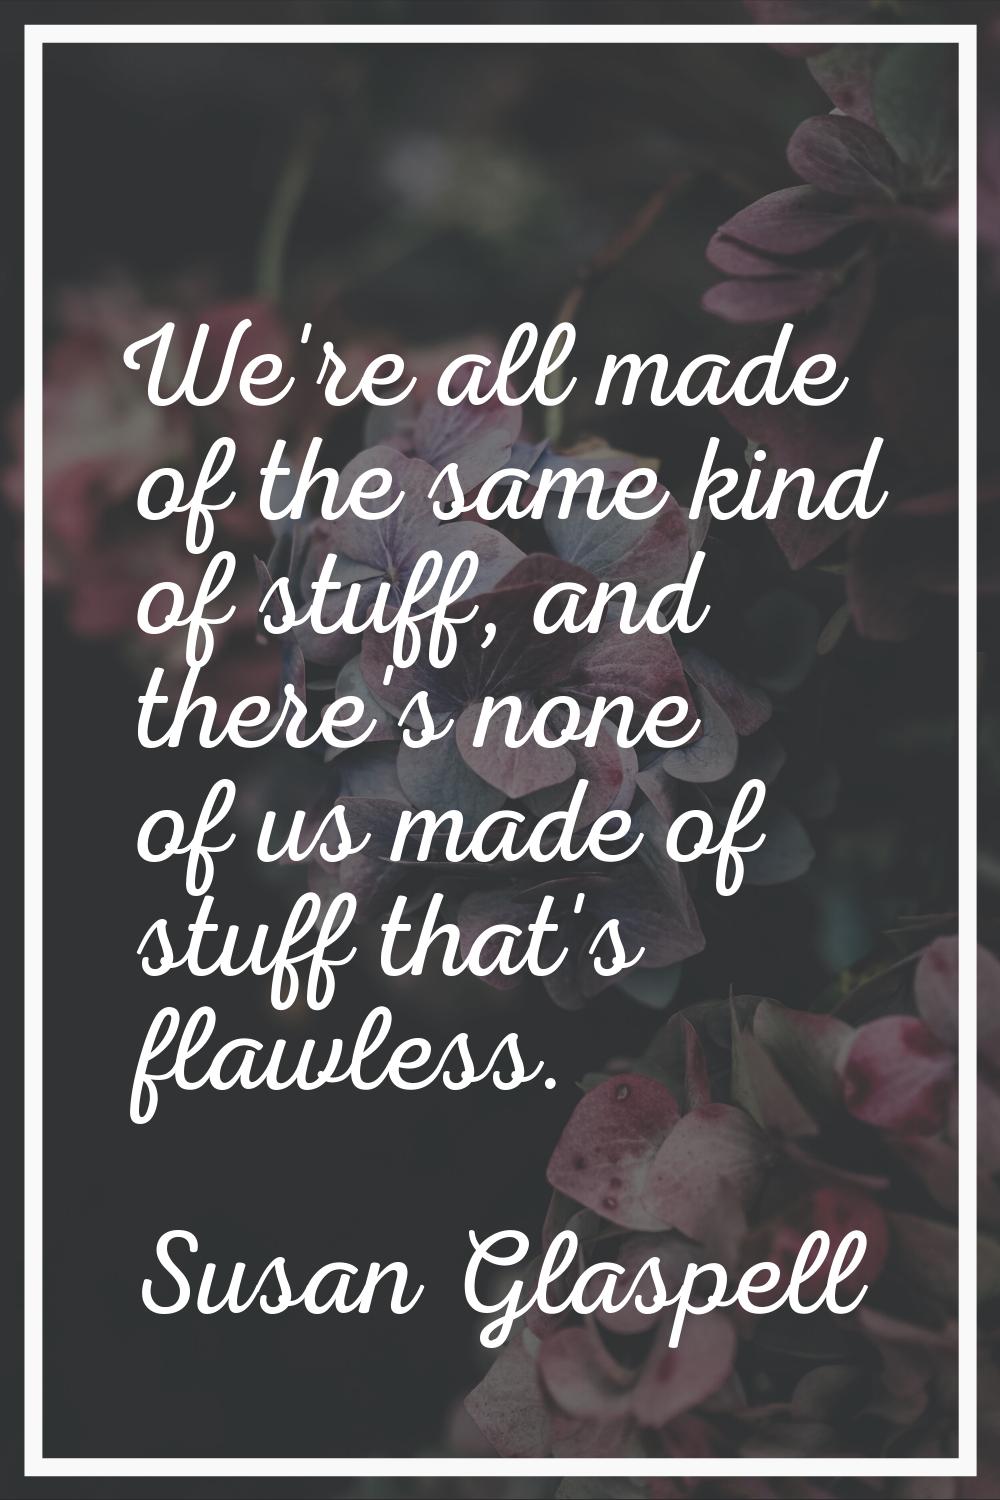 We're all made of the same kind of stuff, and there's none of us made of stuff that's flawless.